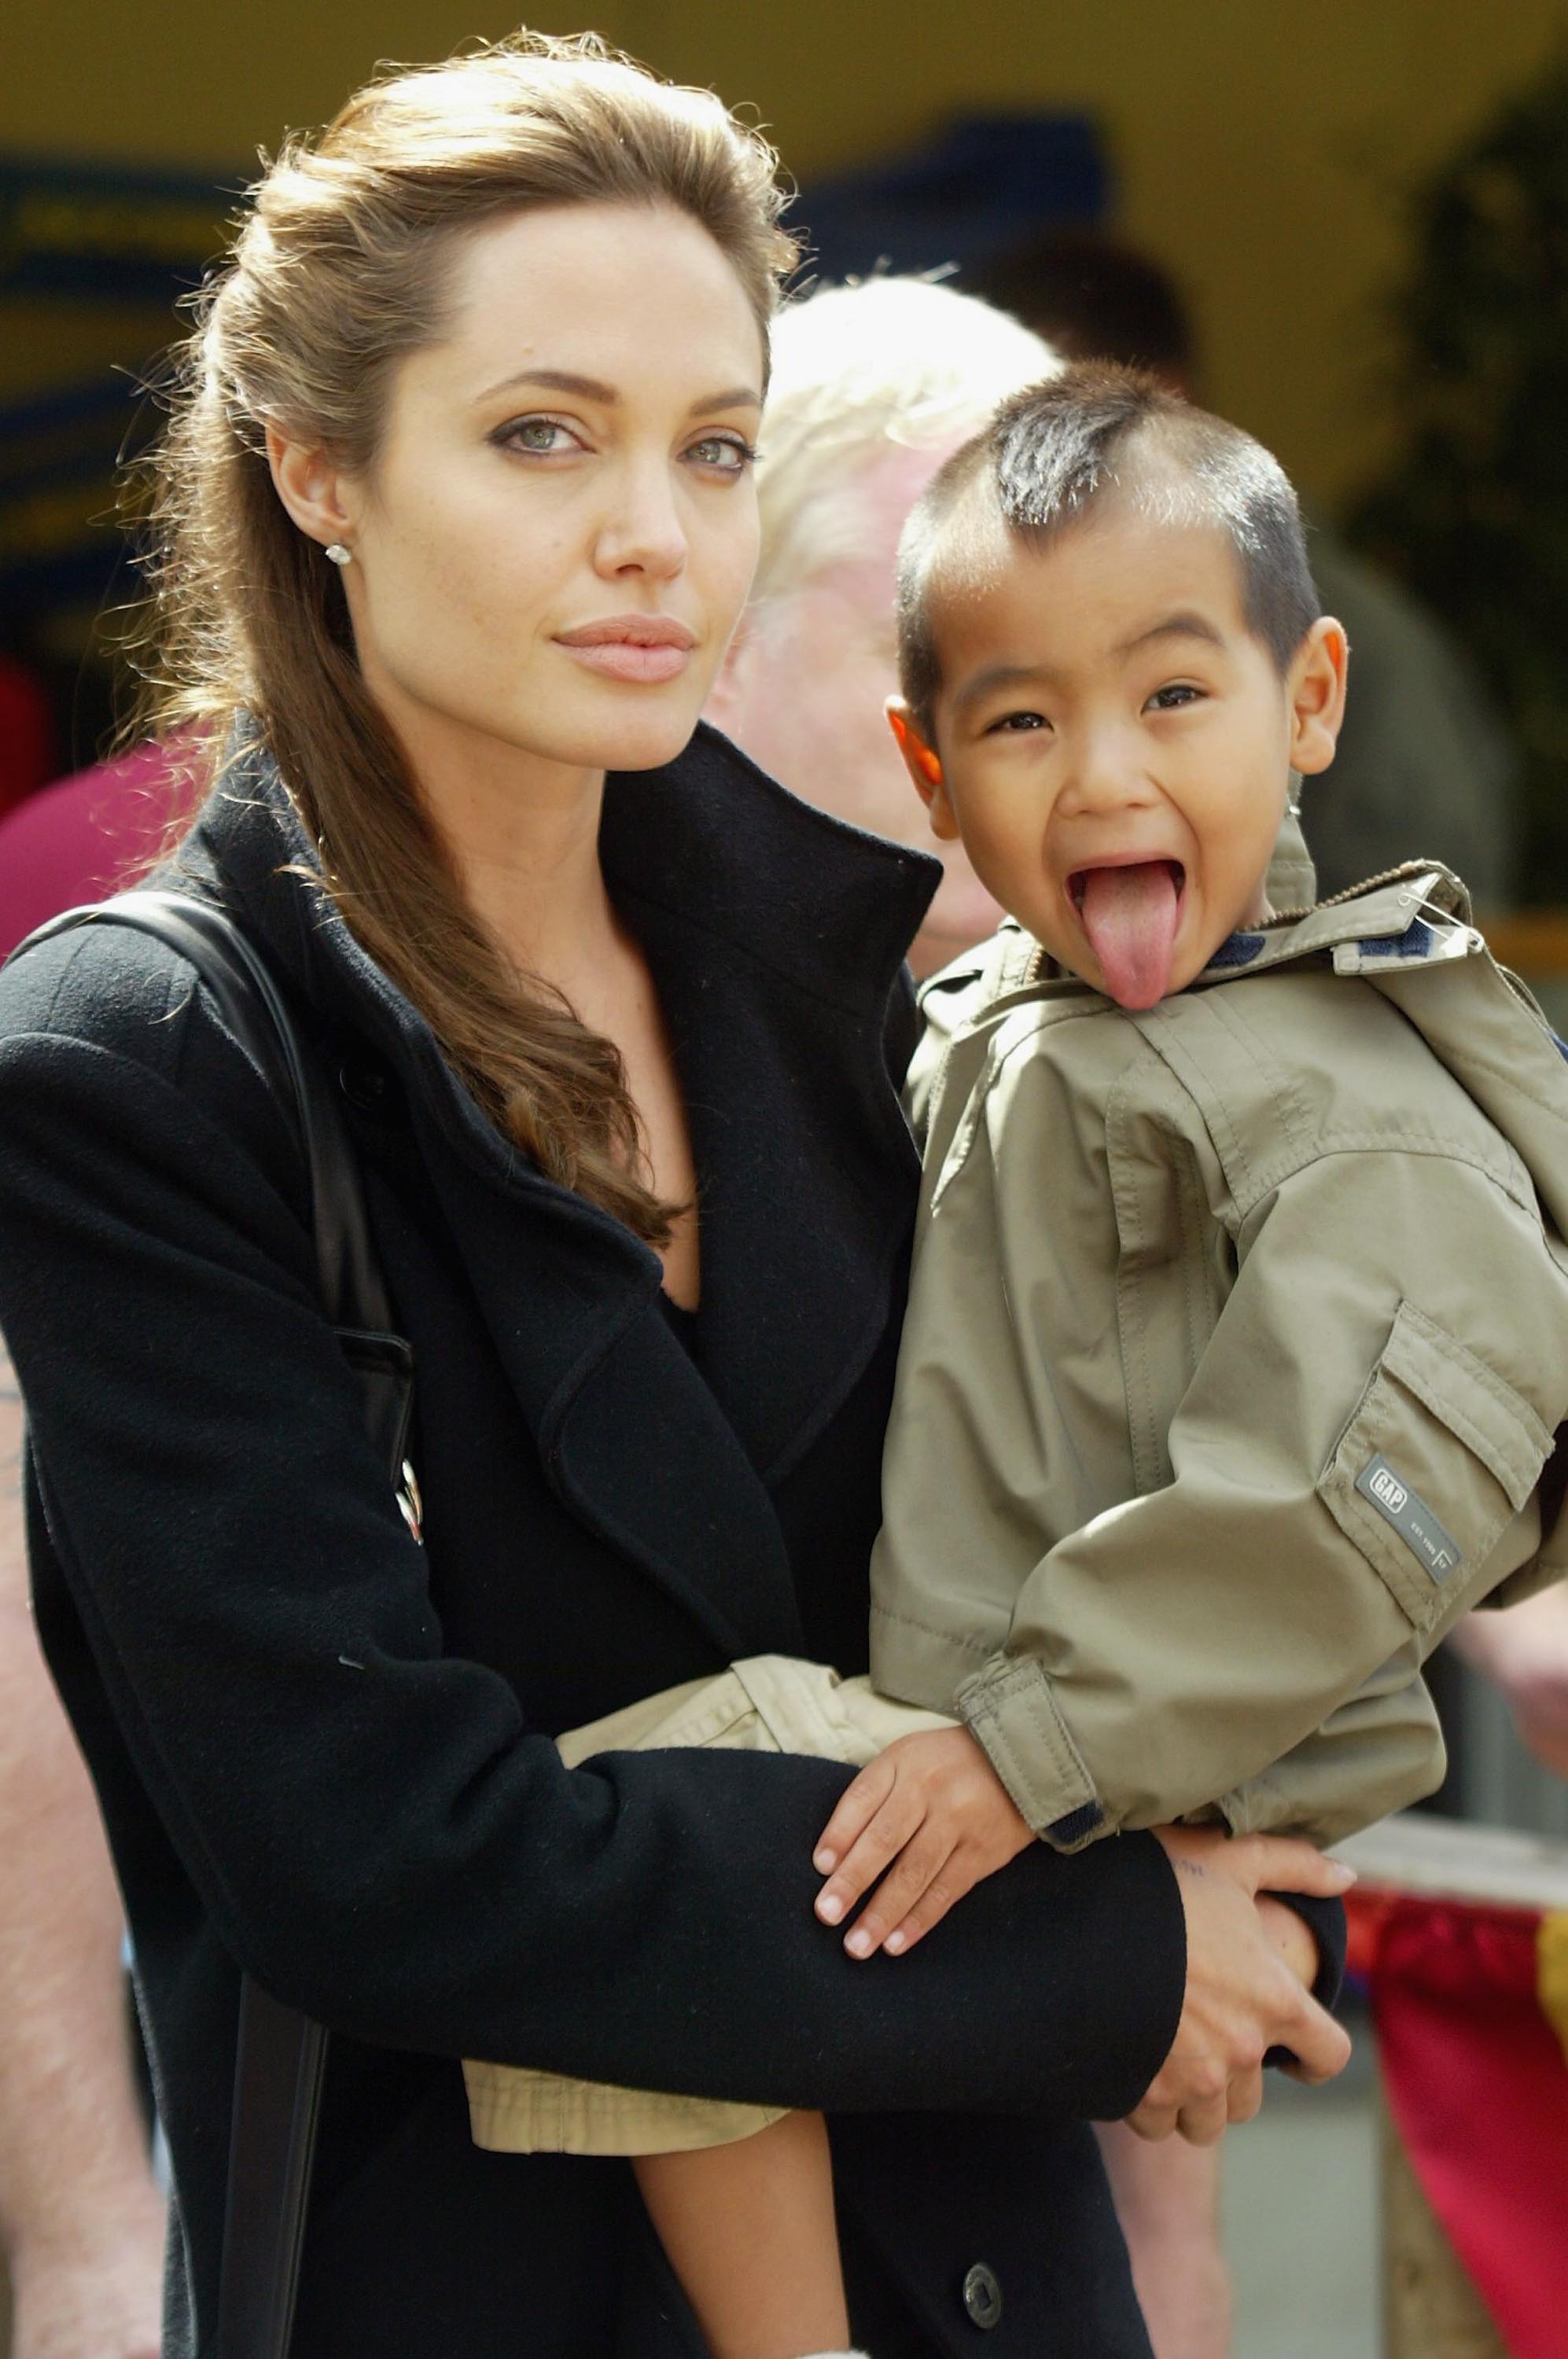 Angelina Jolie and her son Maddox at Live 8, Africa Calling on July 2, 2005 in St. Austell, Cornwall, England.  |  Source: Getty Images